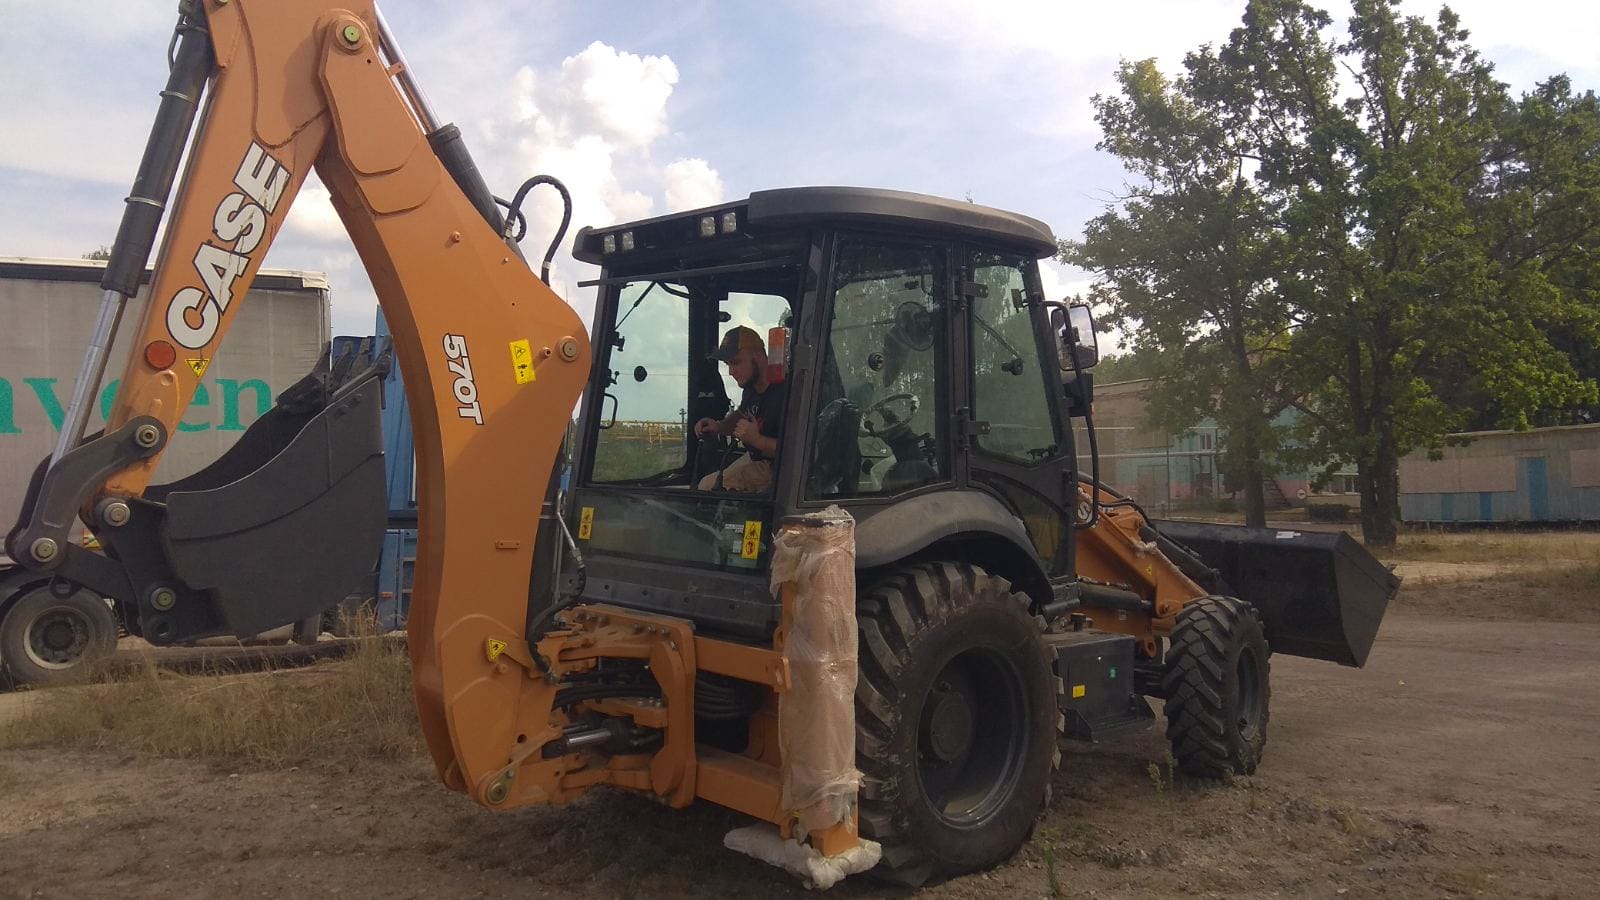 The Irshansk Territorial Community has received another technical aid - a tractor-excavator